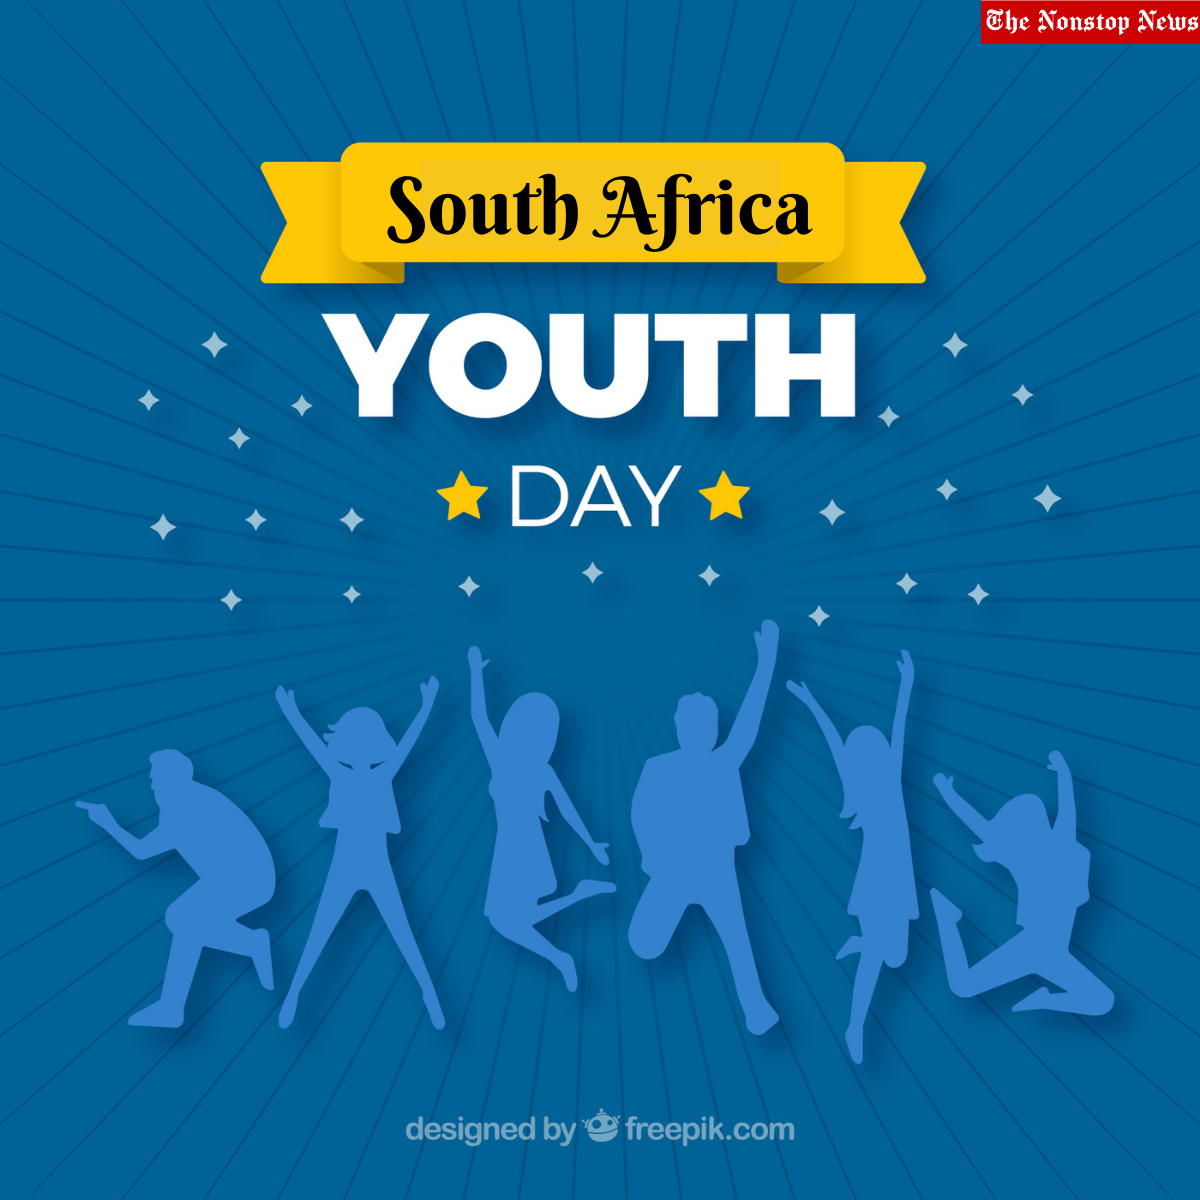 Youth Day in South Africa 2022: Wishes, Images, Messages, Greetings, Quotes to Share